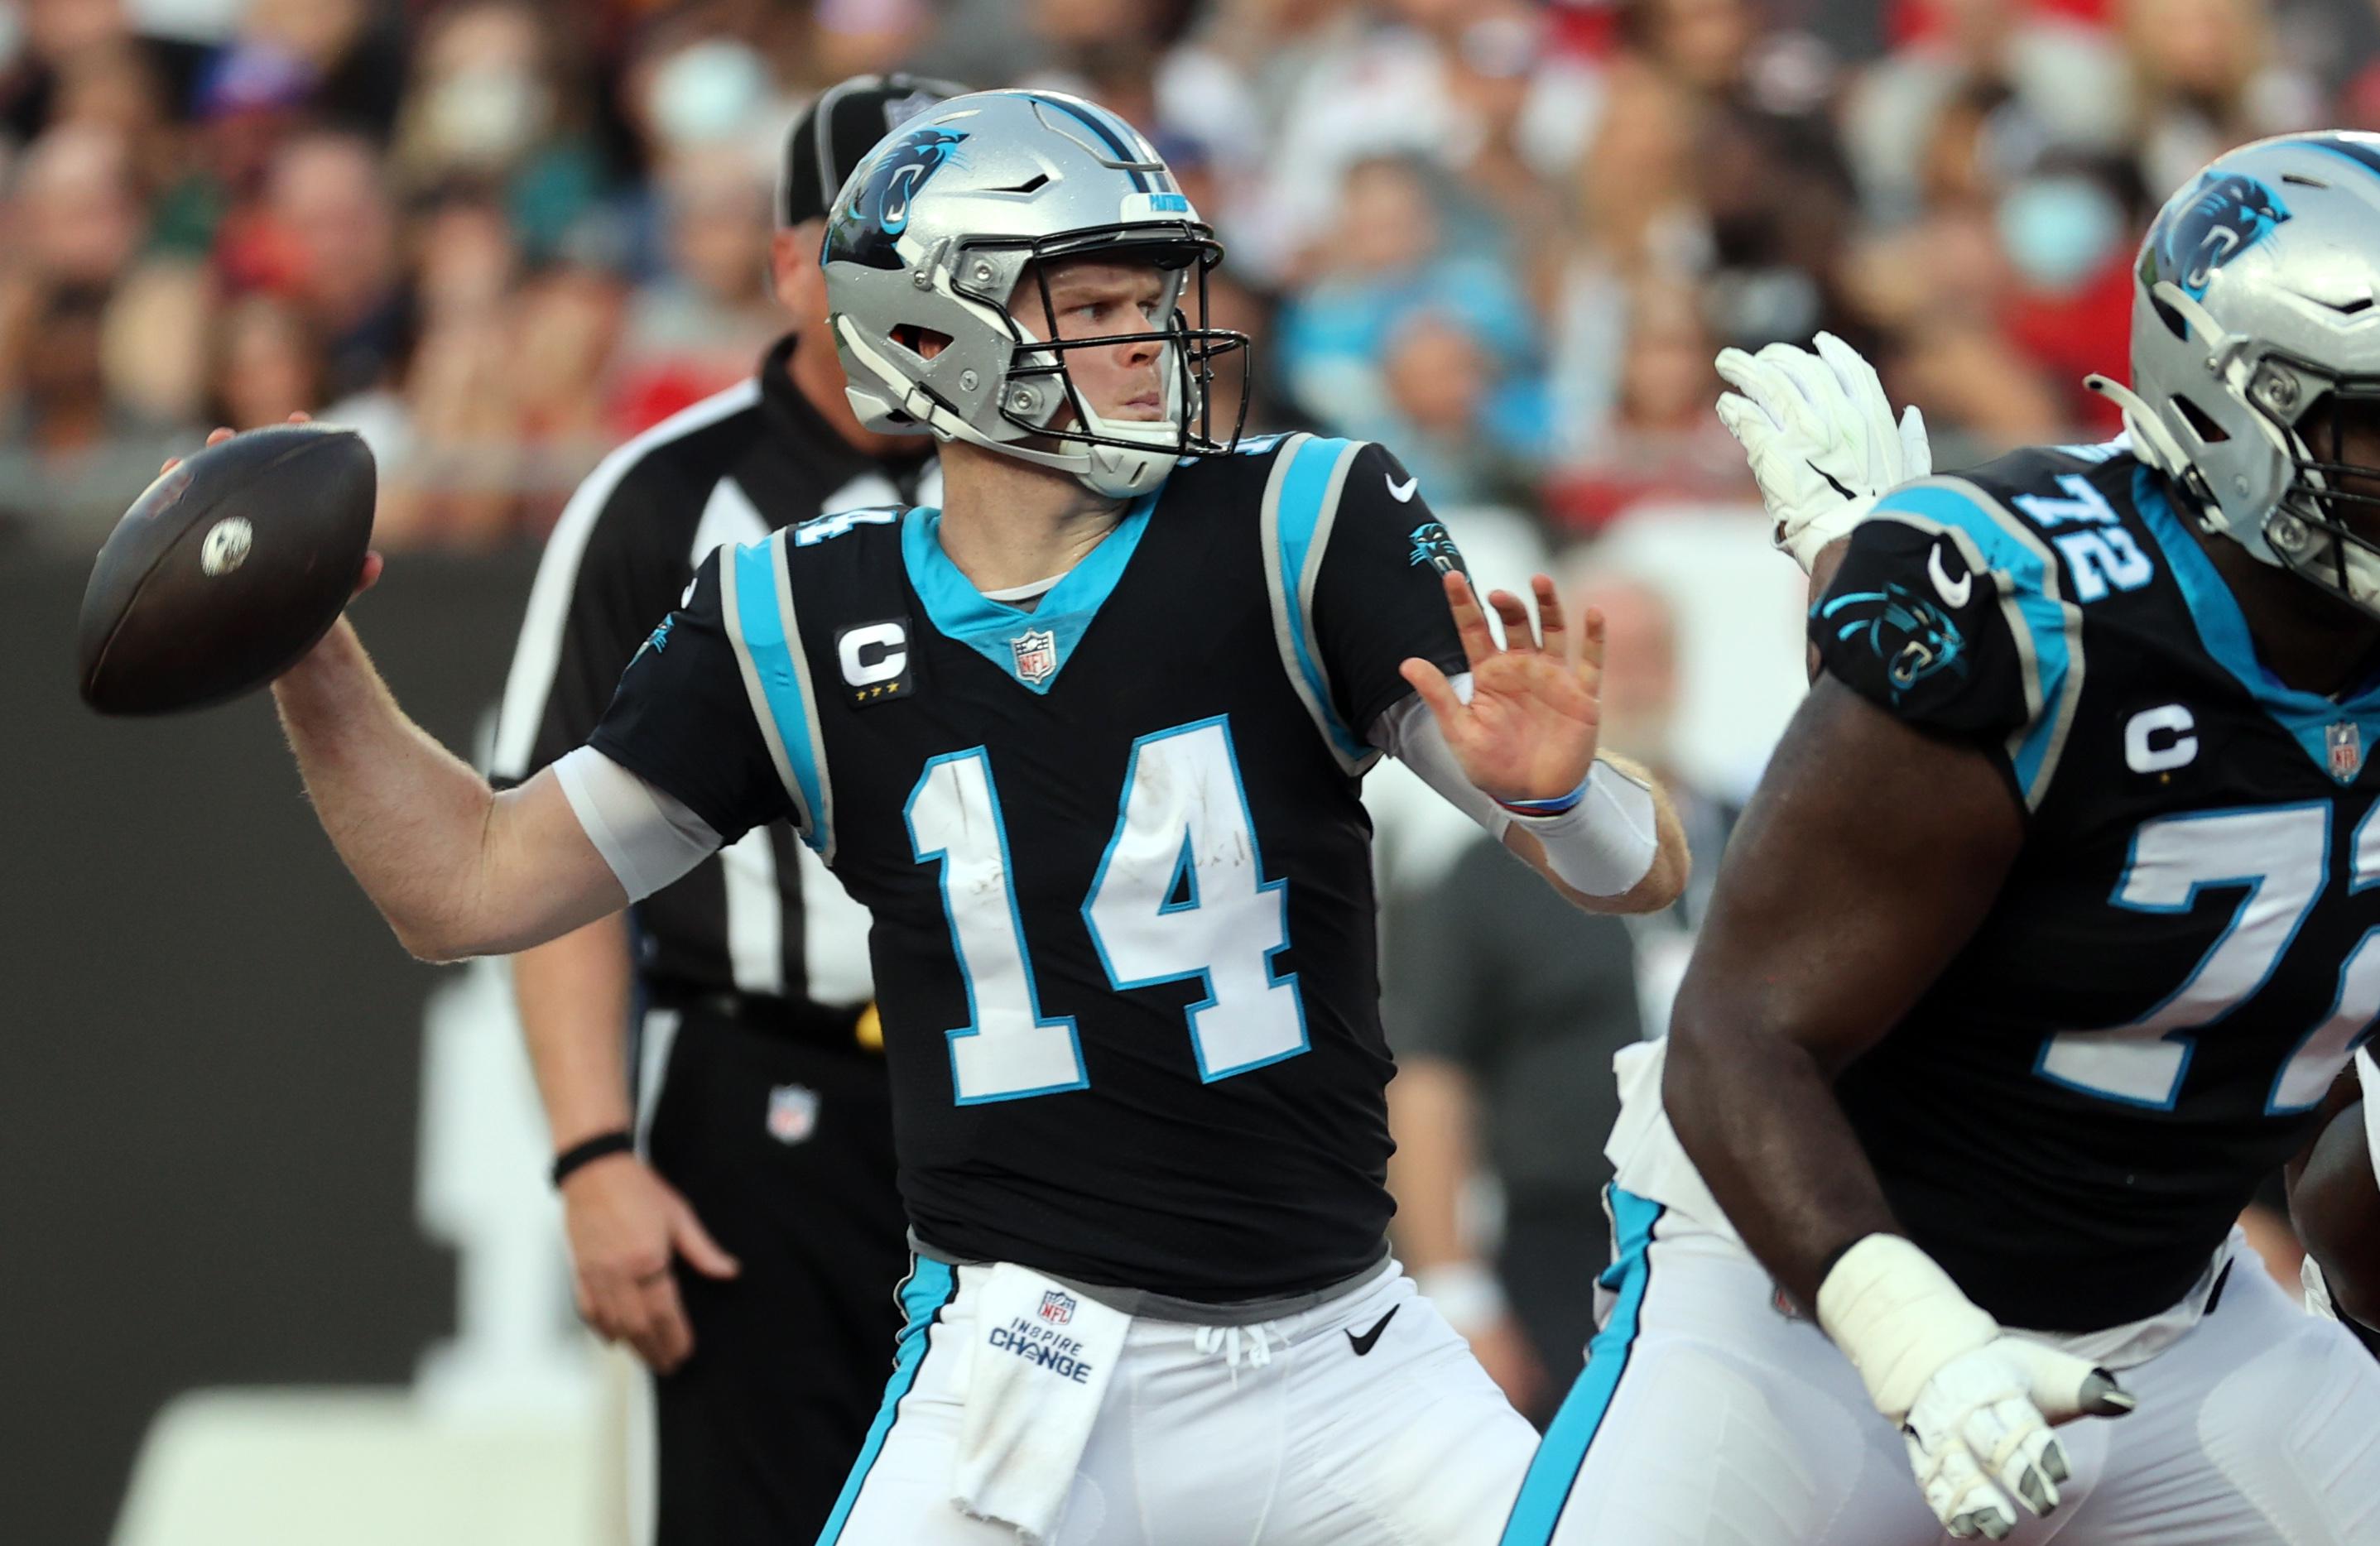 What if the Panthers went for a more modern uniform update? by